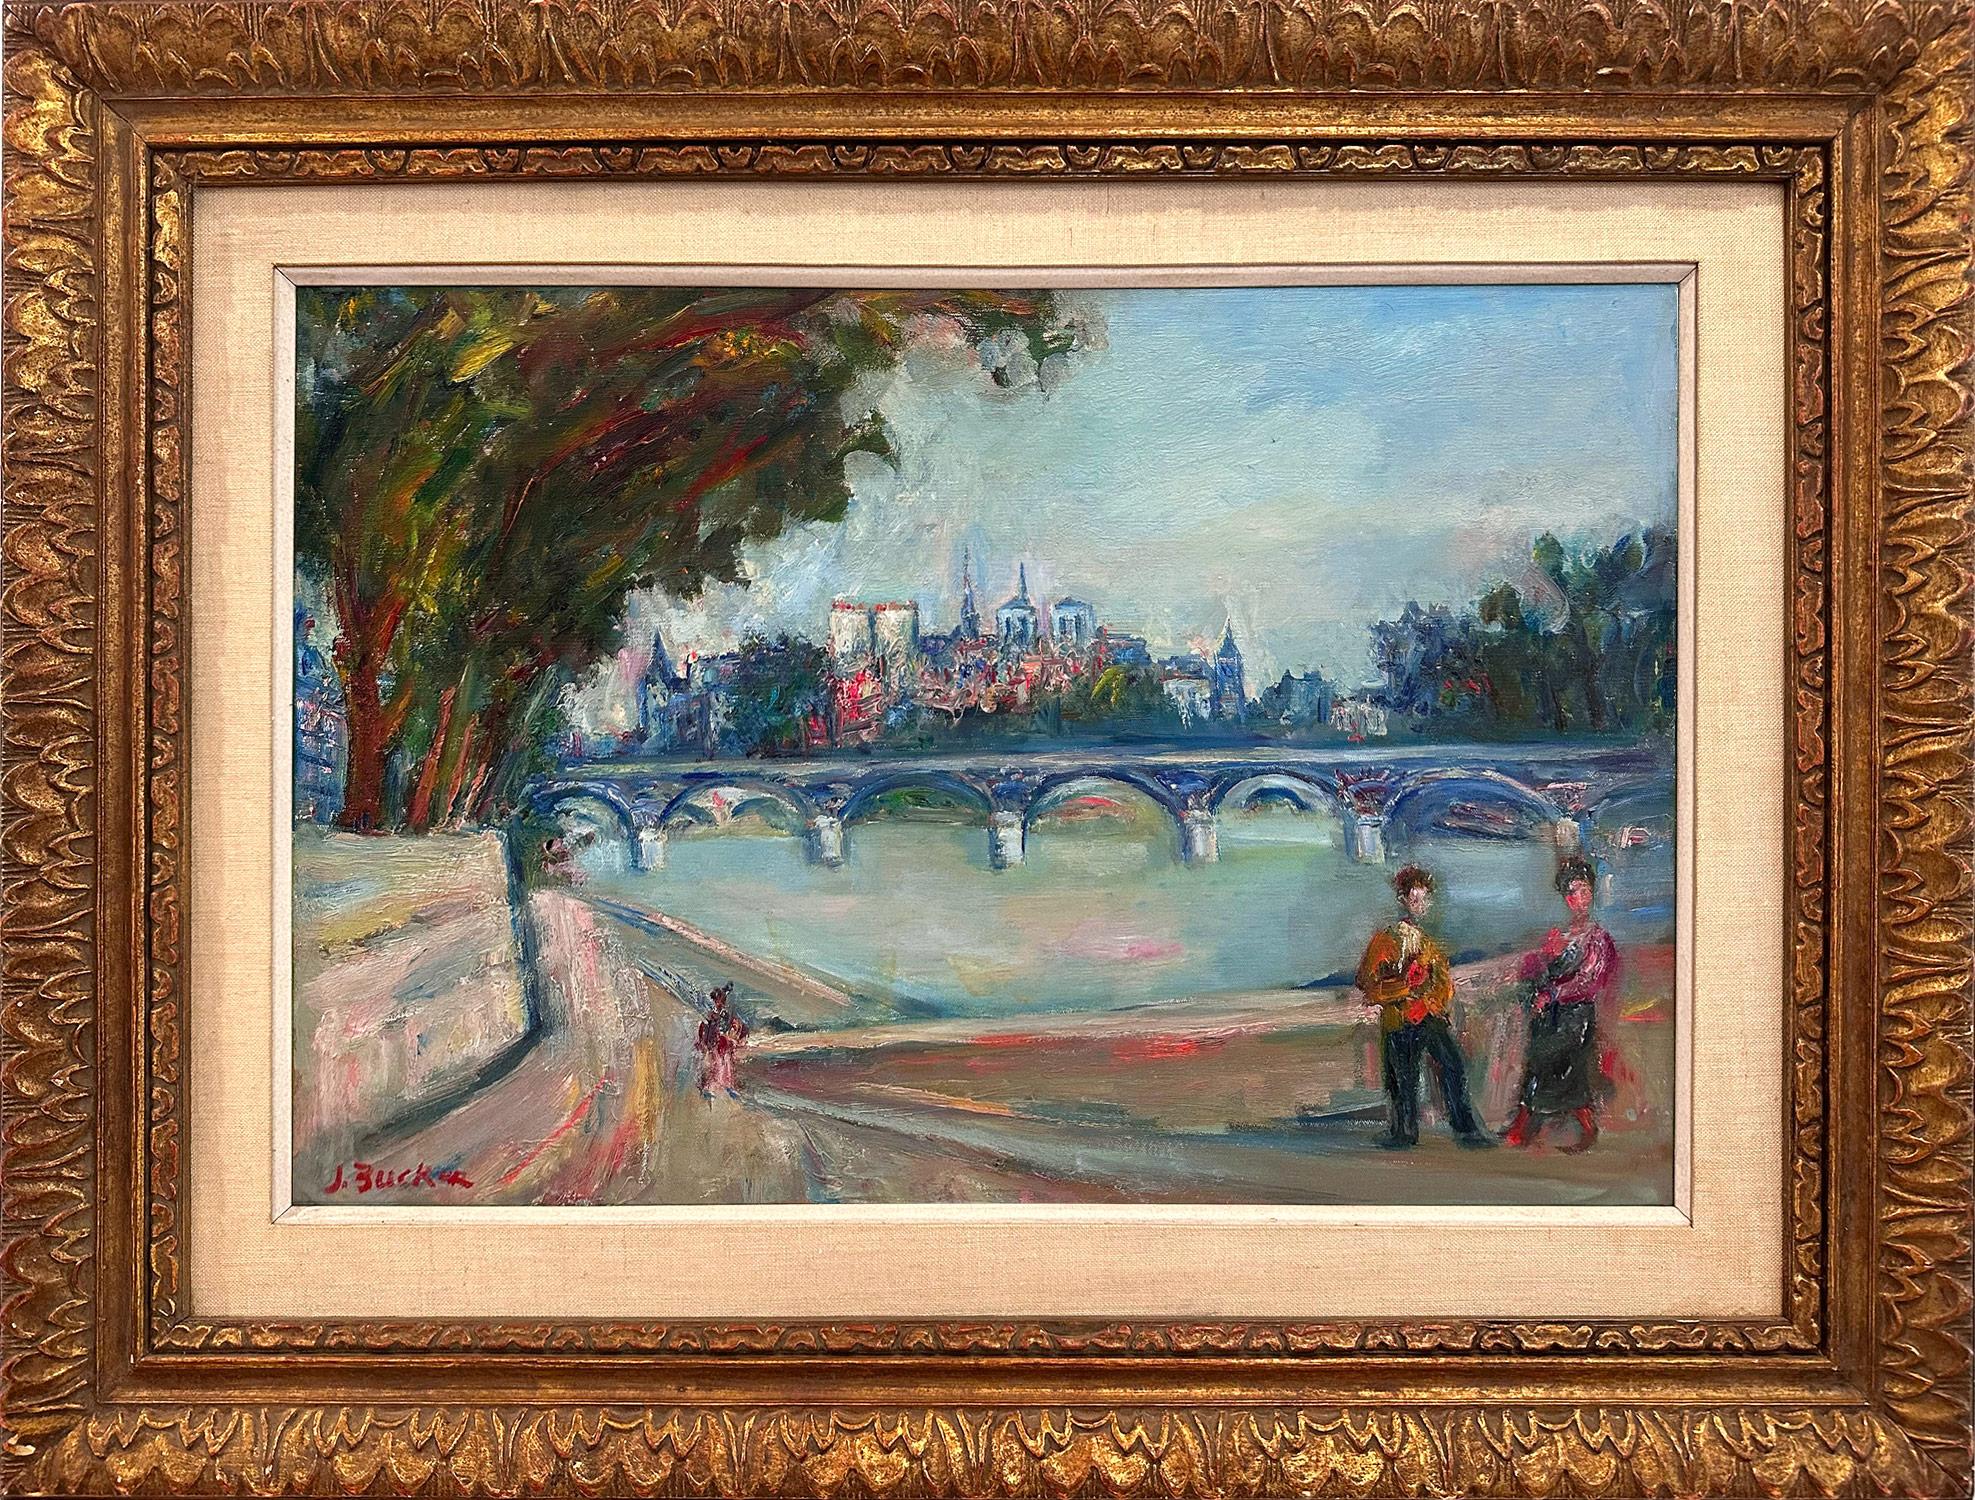 Jacques Zucker Figurative Painting - "Parisian Scene by Pont Neuf & Notre Dam" Post-Impressionist Oil Painting Canvas